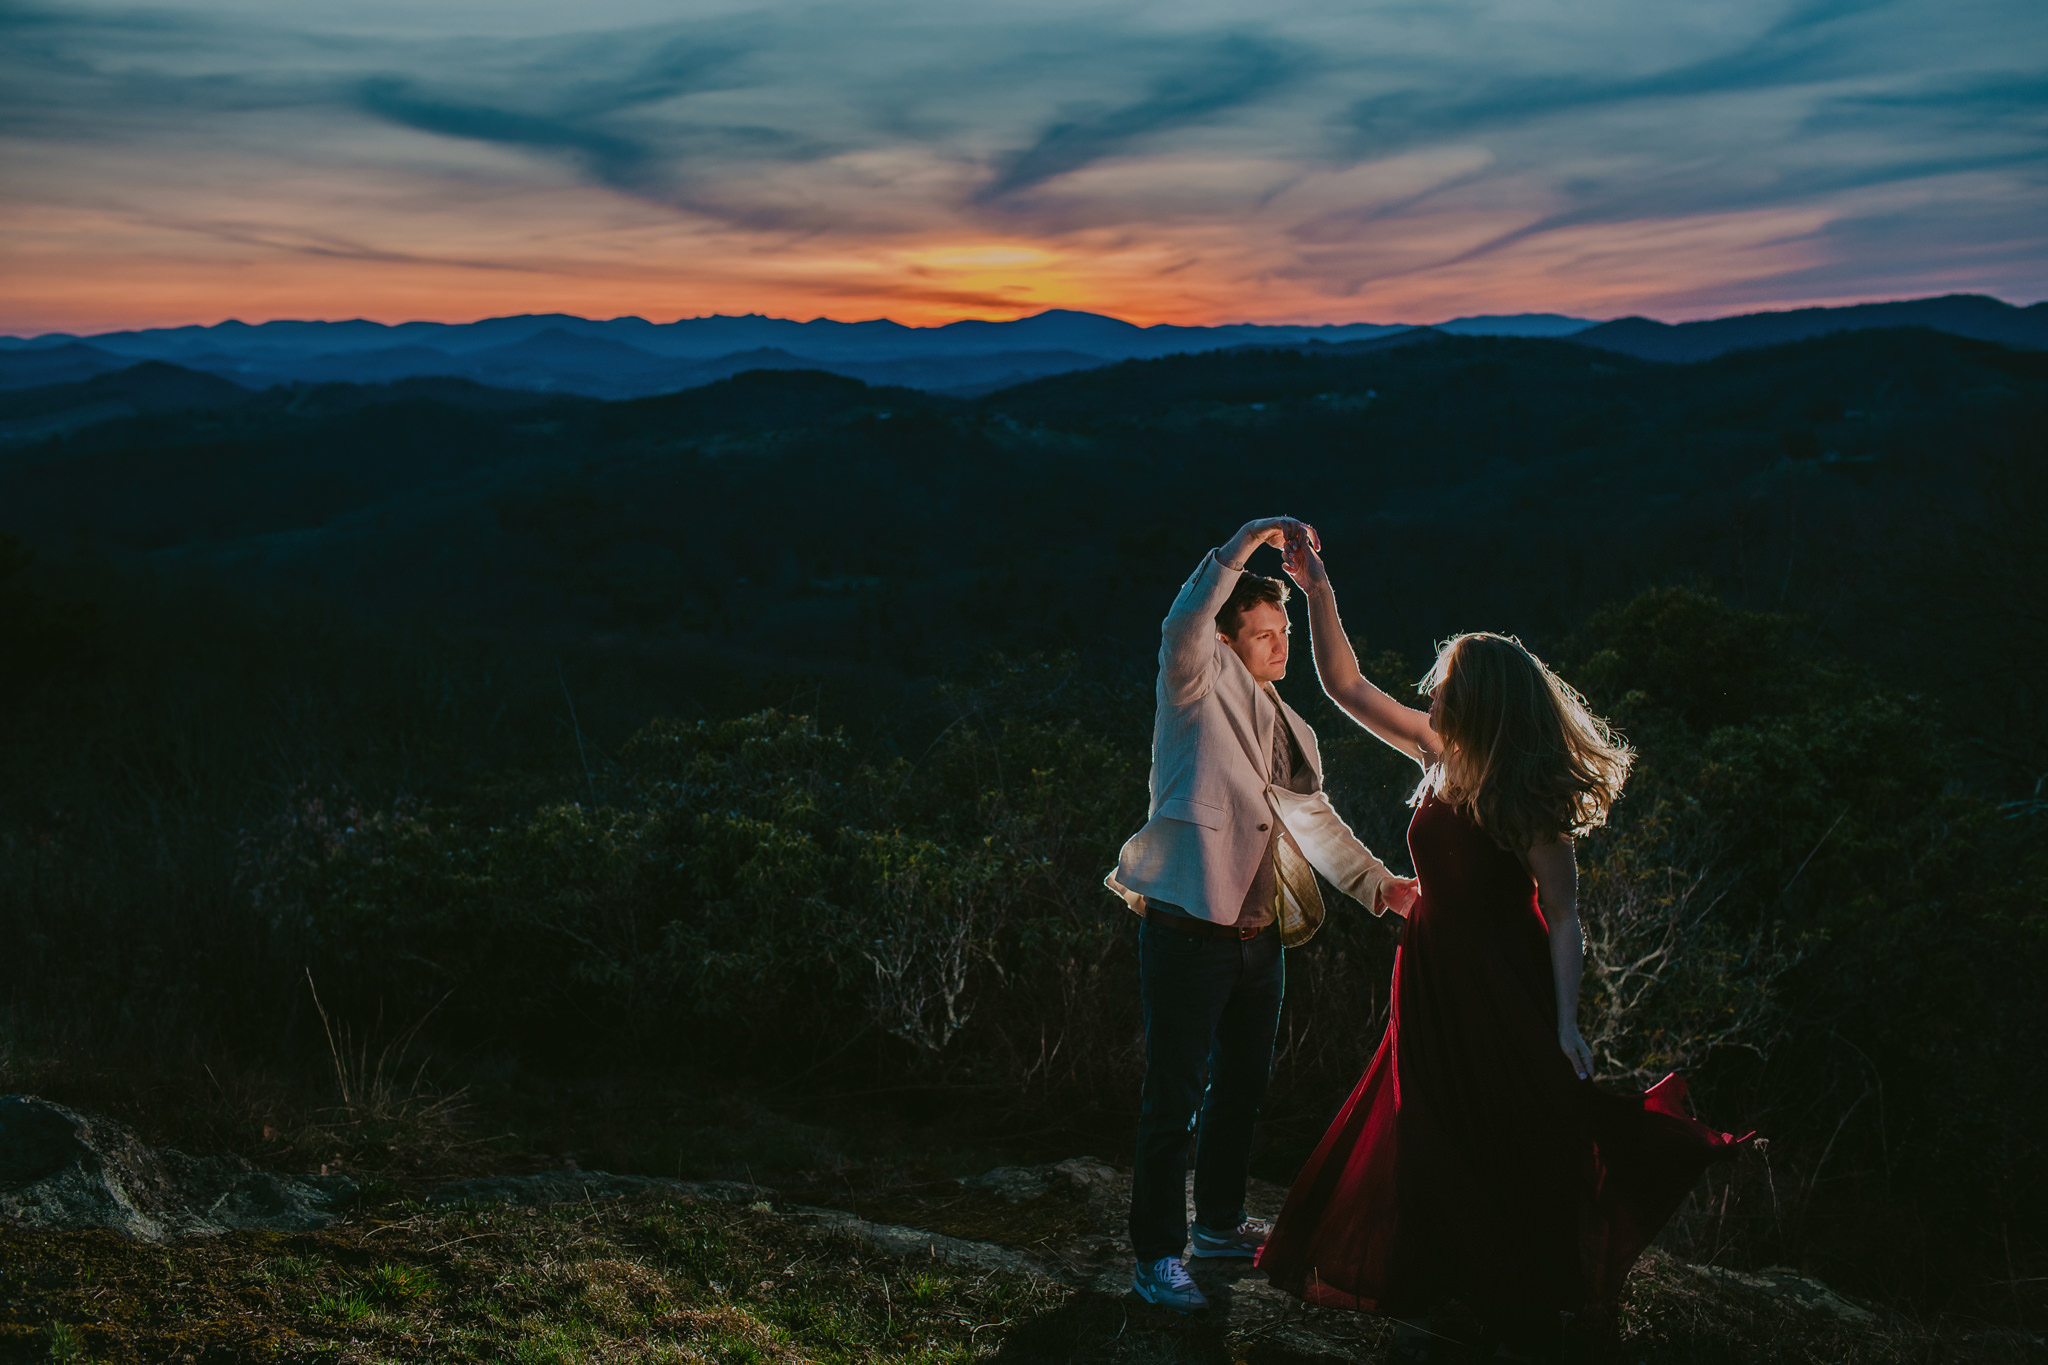 The Appalachian mountains create a stunning backdrop for this couple's anniversary session with Mabyn Ludke Photography